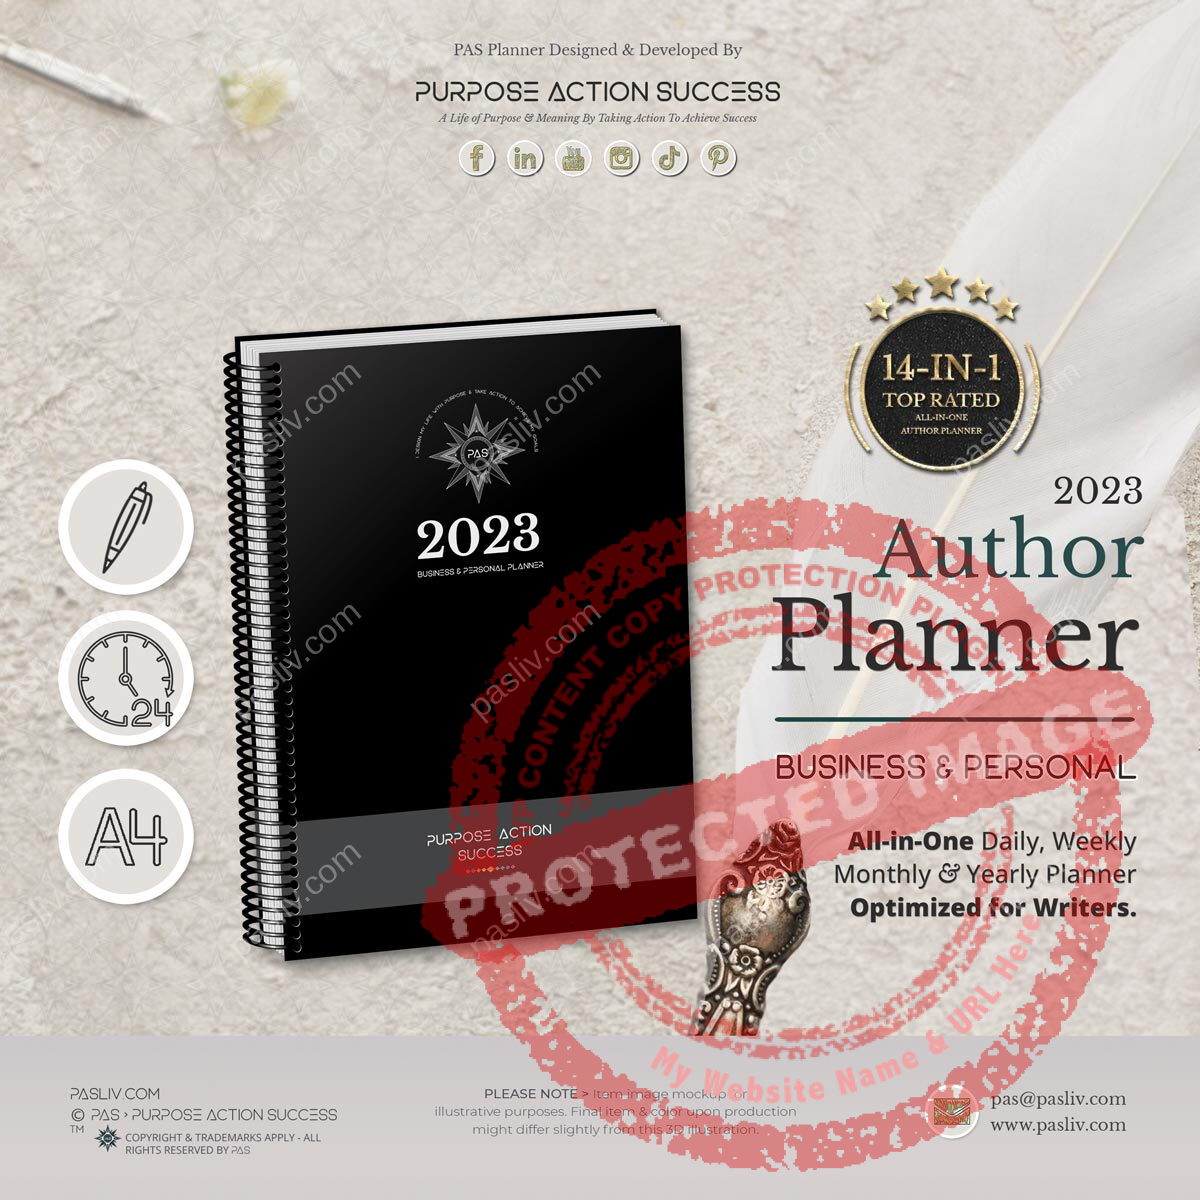 PAS Author Planner 2023 Diary Black Andromedah Cover - Copyright & Trademarks Apply - All Rights Reserved by PAS > Purpose Action Success.